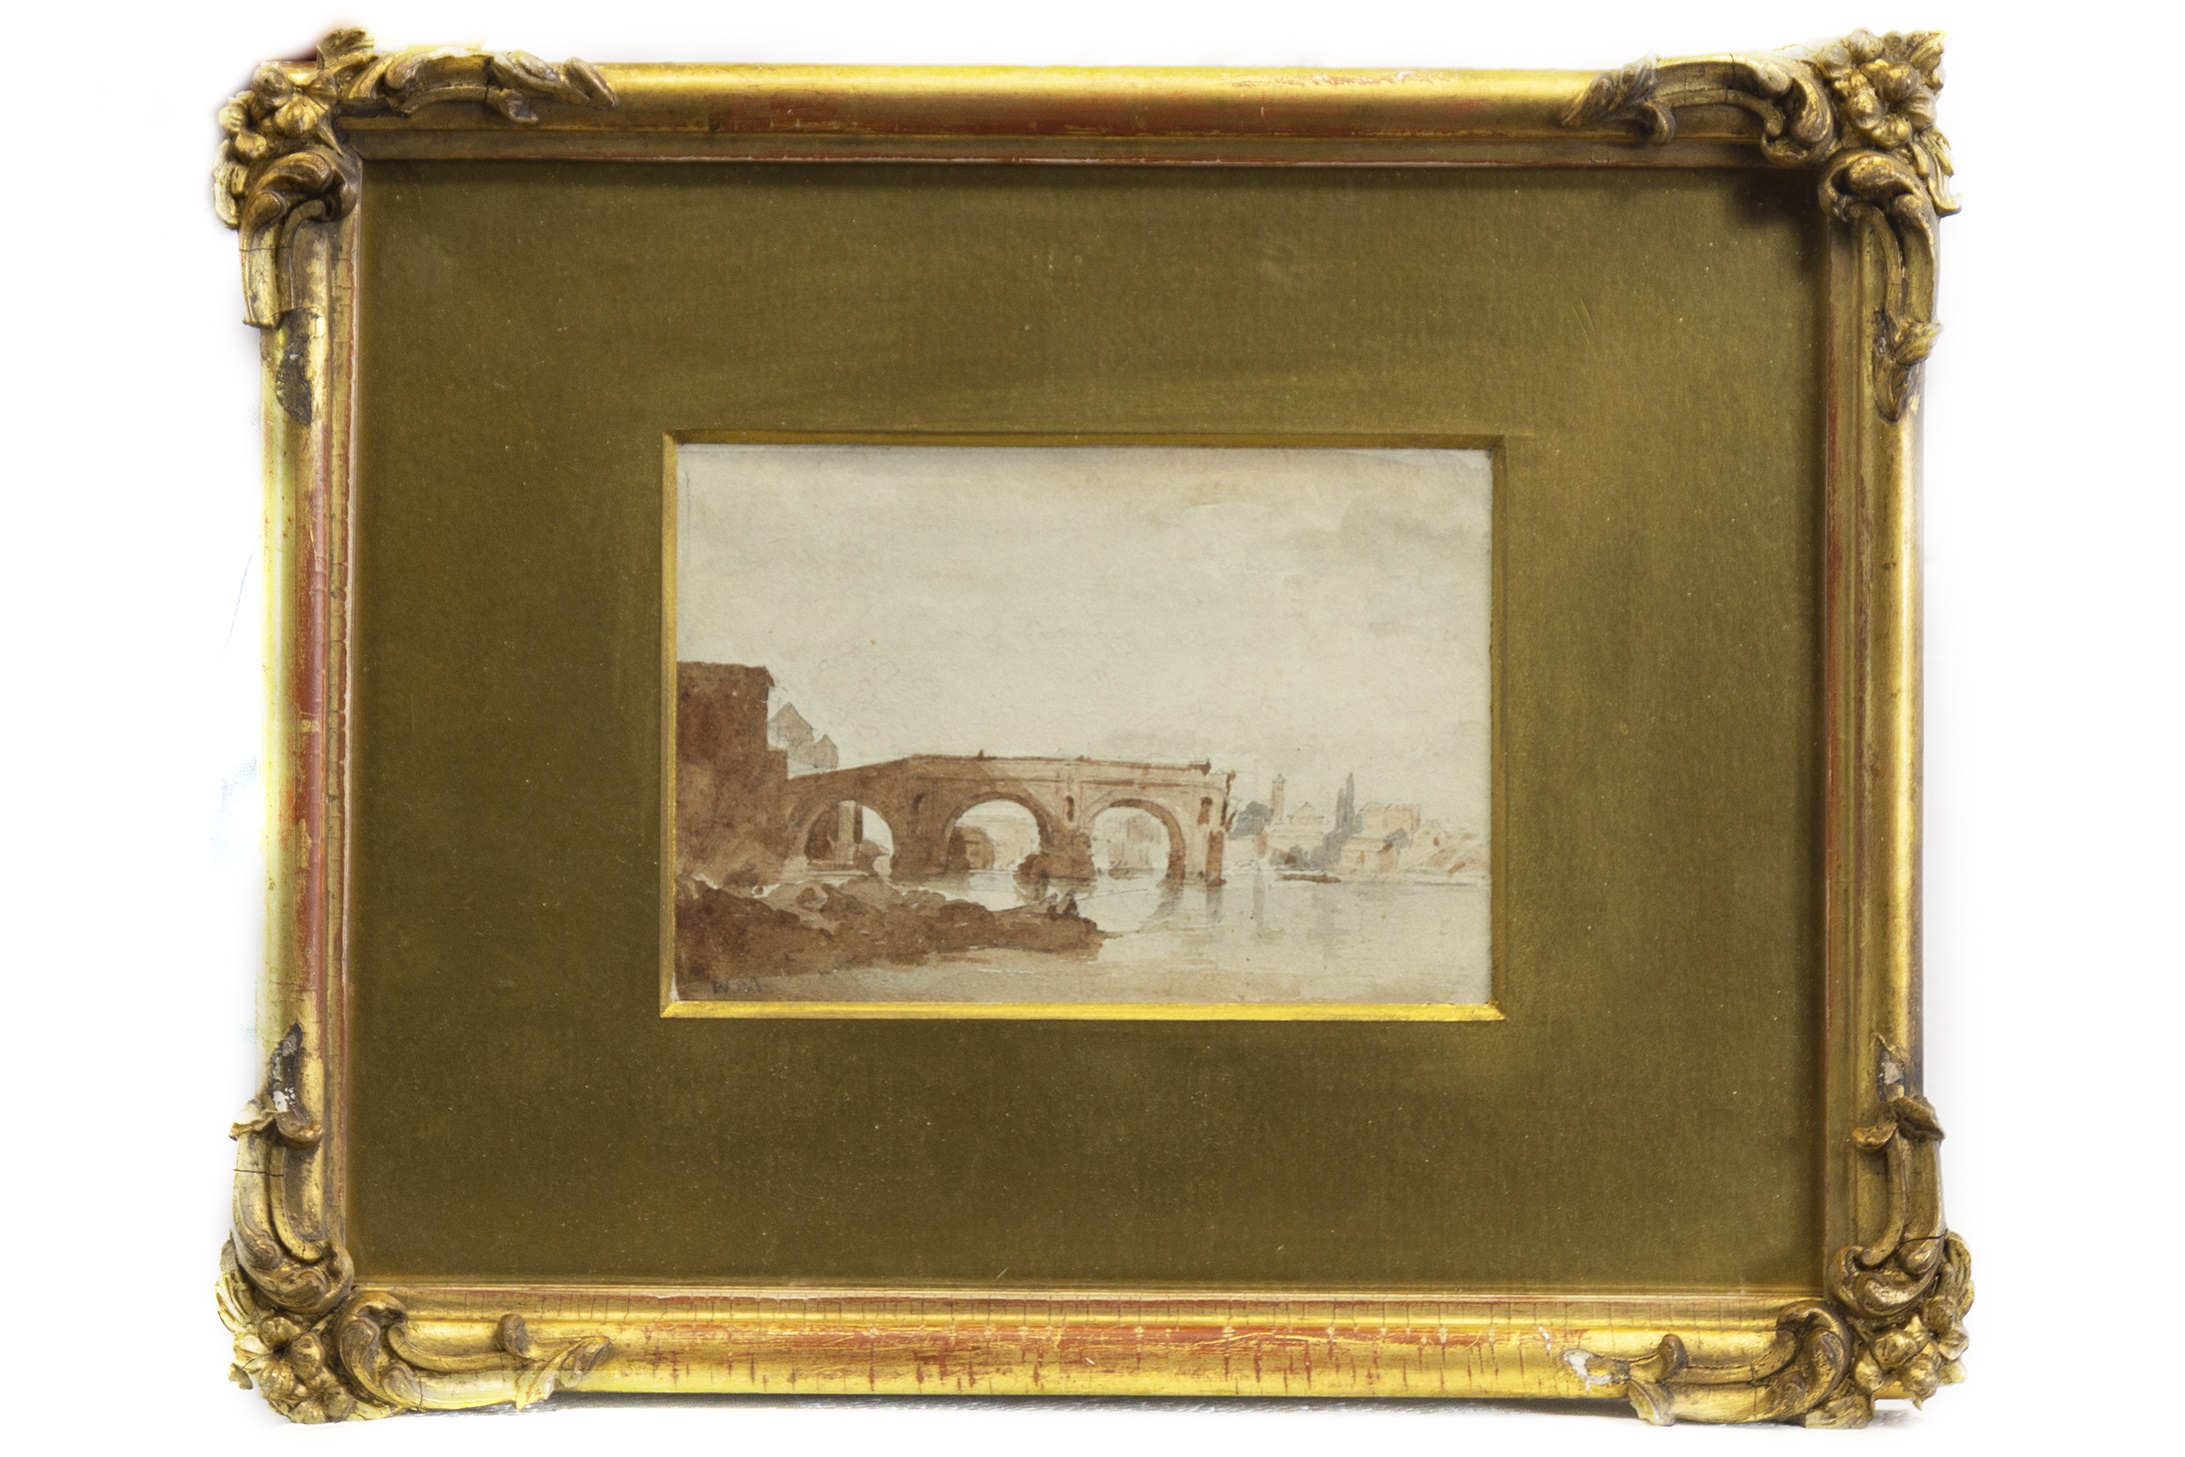 PONTE ROTTO, ROME, A WATERCOLOUR BY WILLIAM MARLOW